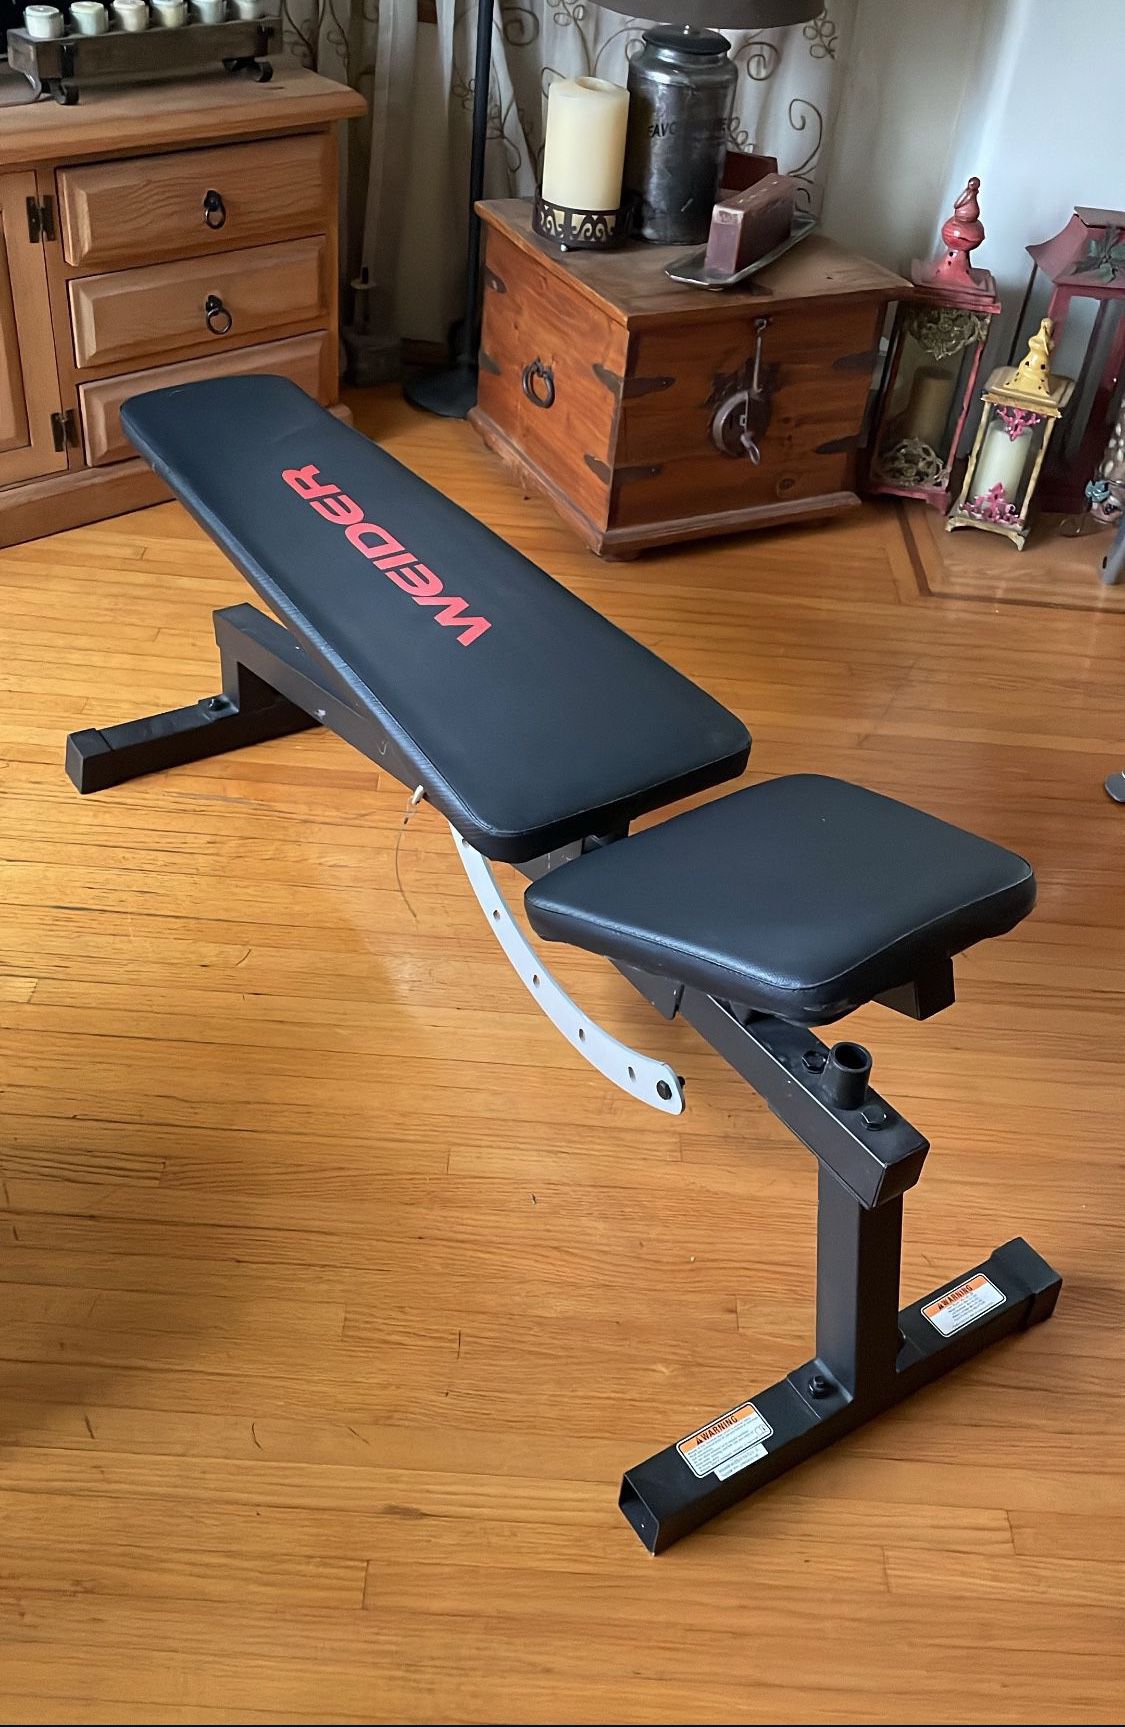 Weider Adjustable Exercise Bench For Sale!!